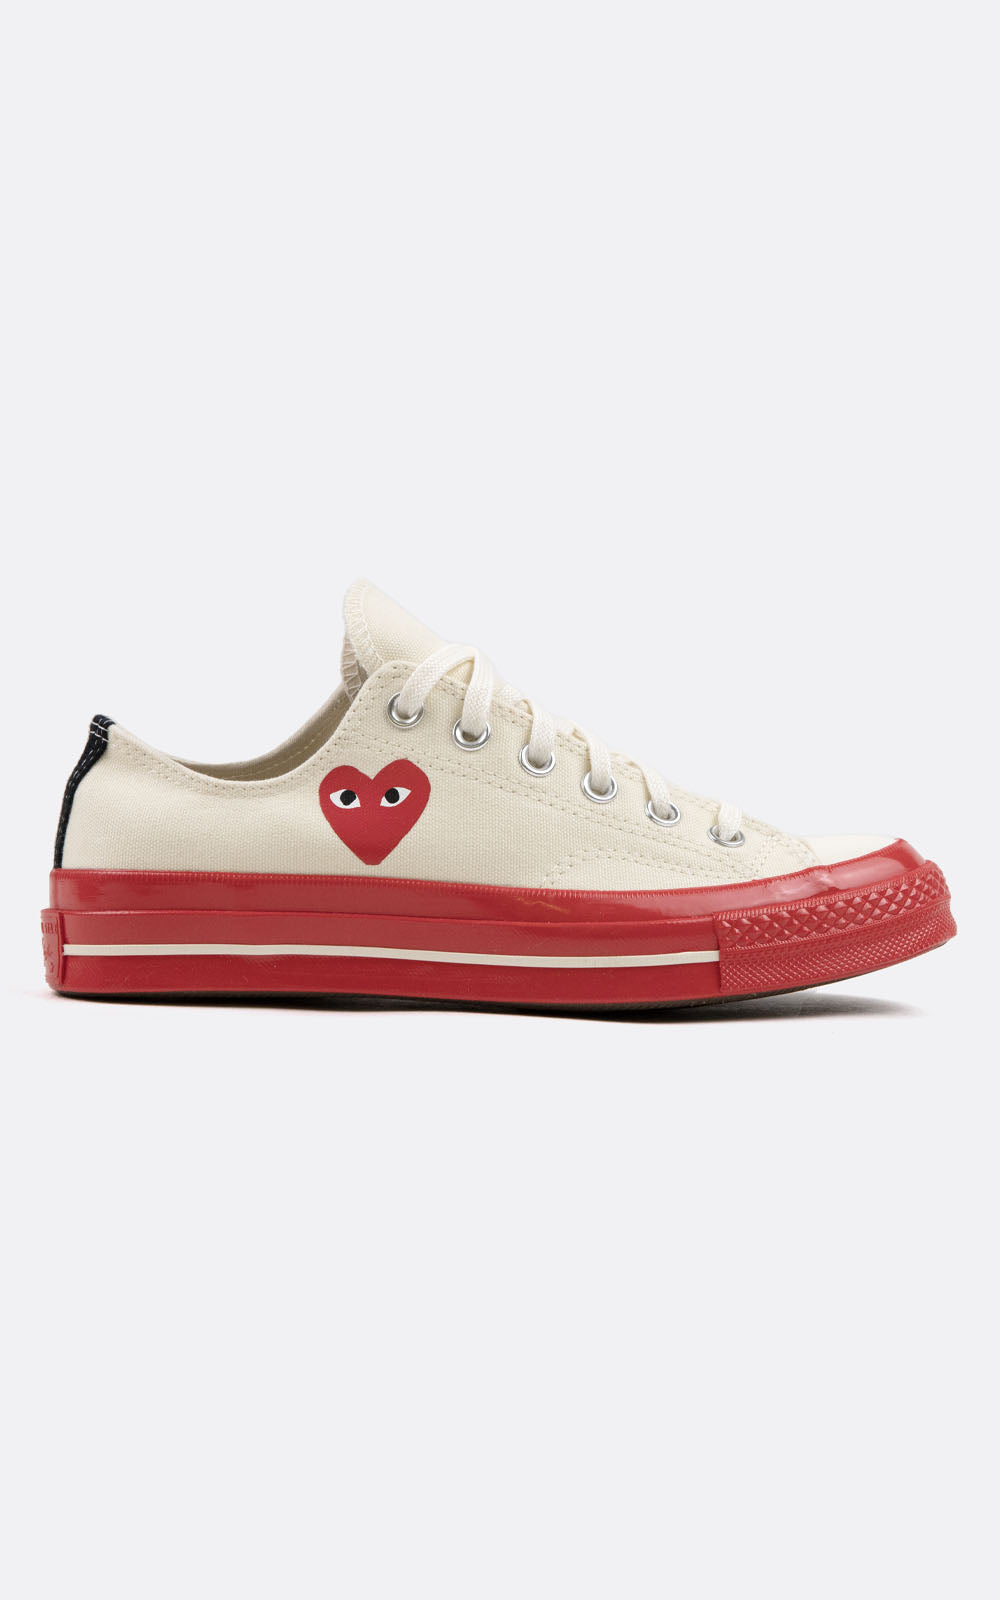 PLAY CDG X CONVERSE CHUCK TAYLOR'70-RED SOLE/LOW TOP/WHITE